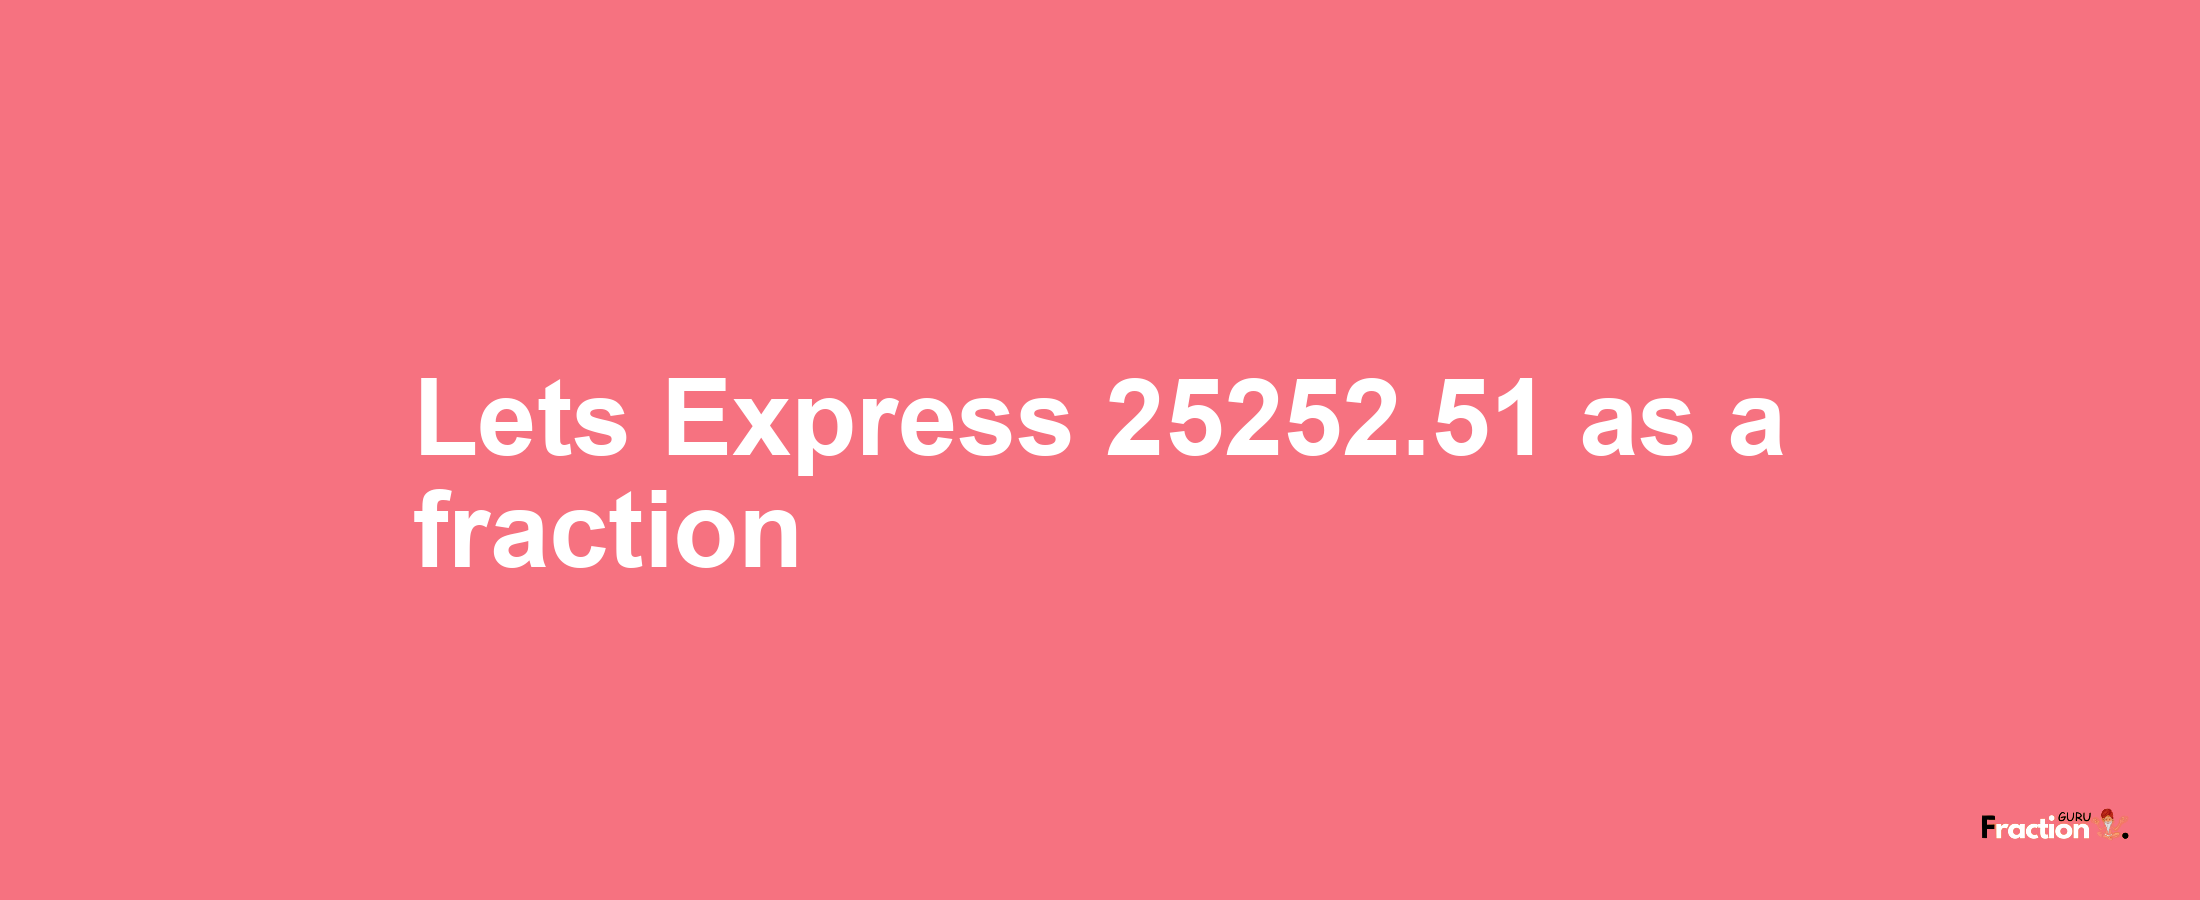 Lets Express 25252.51 as afraction